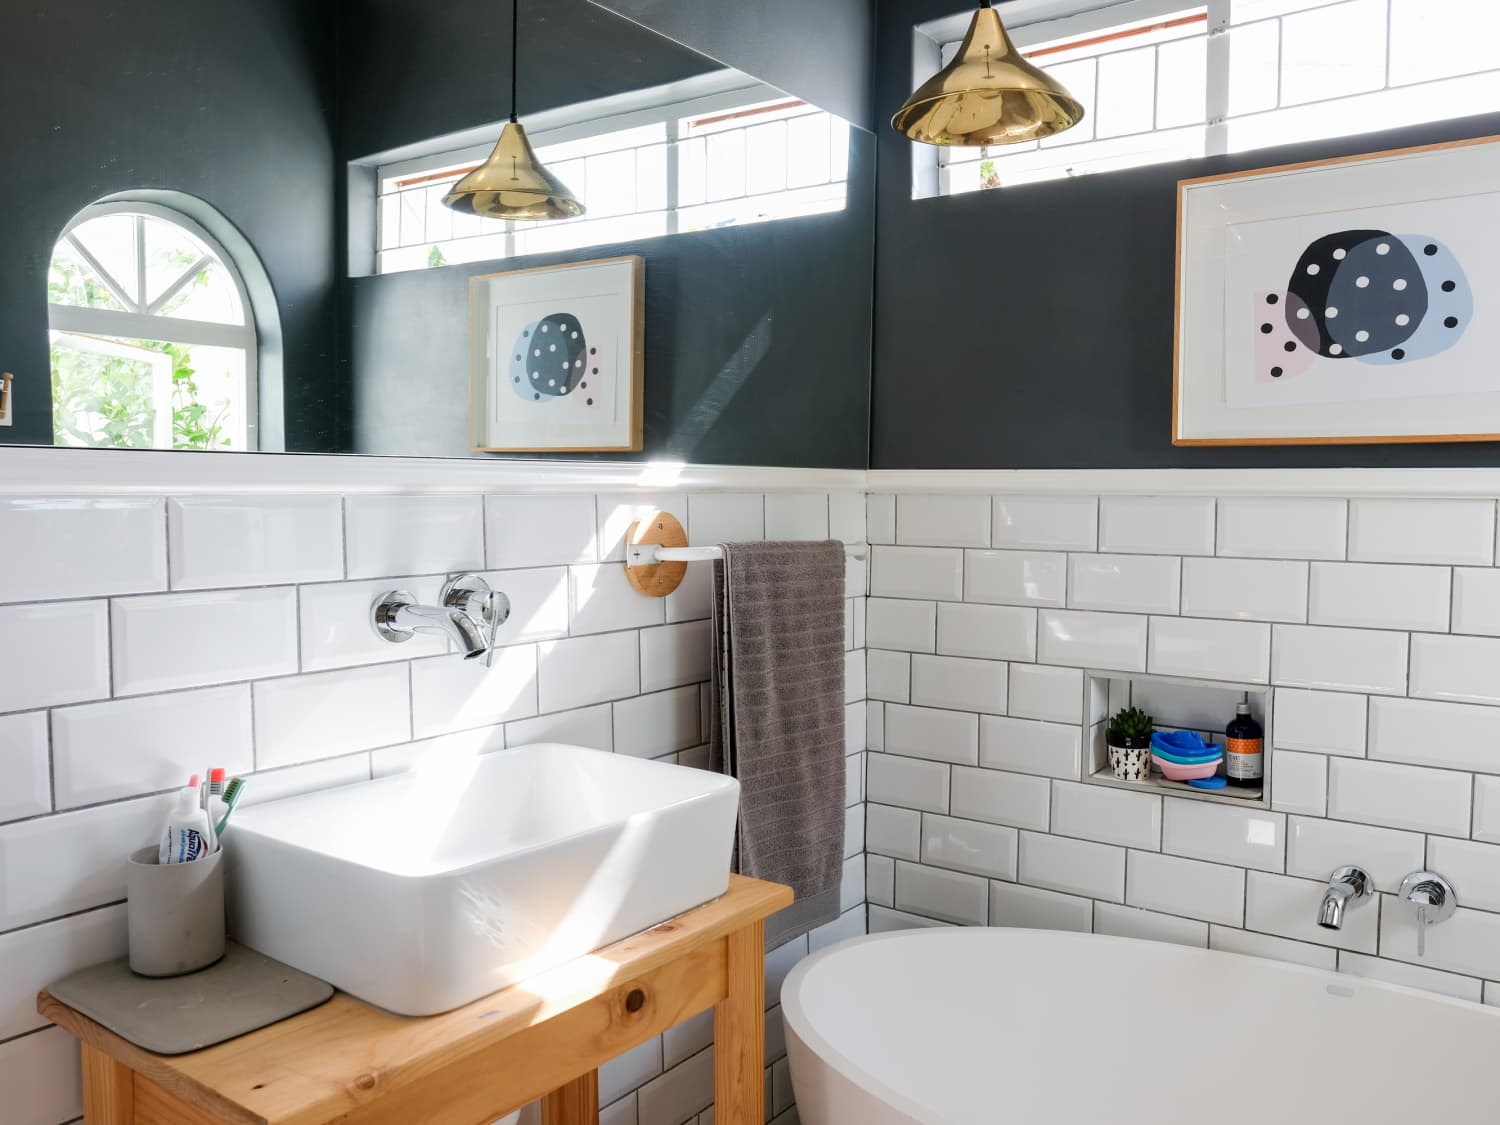 How To - Double your storage in a small bathroom